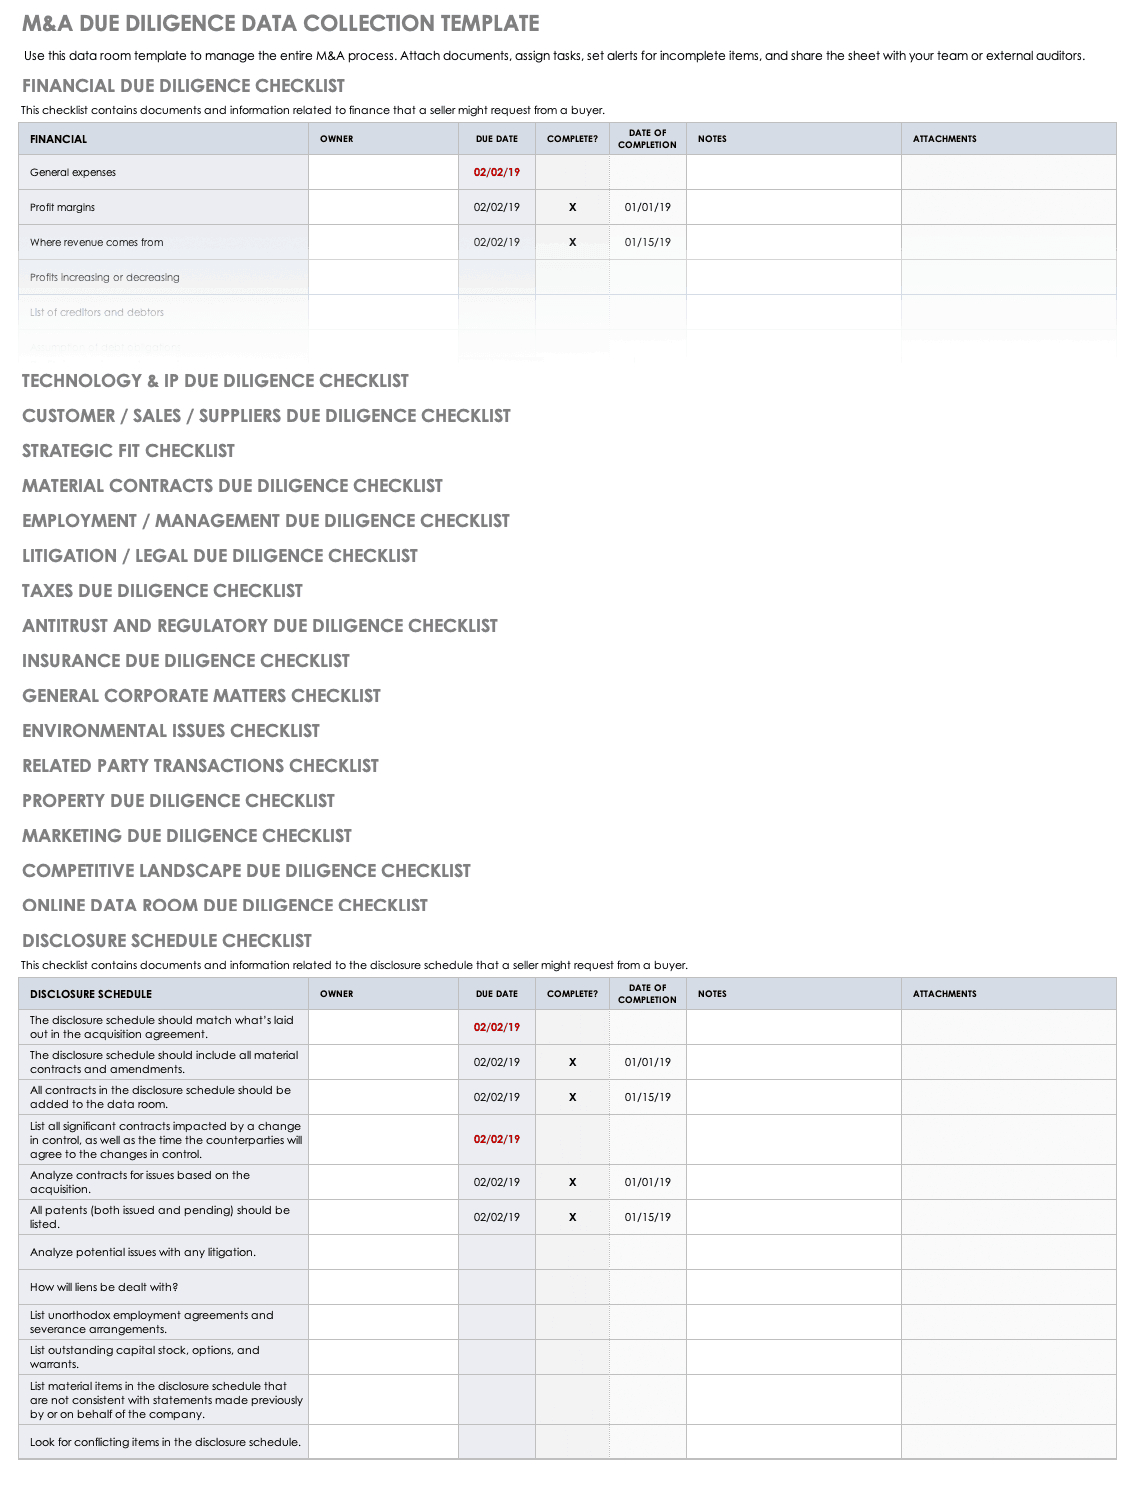 Free Due Diligence Templates And Checklists | Smartsheet Throughout Vendor Due Diligence Report Template